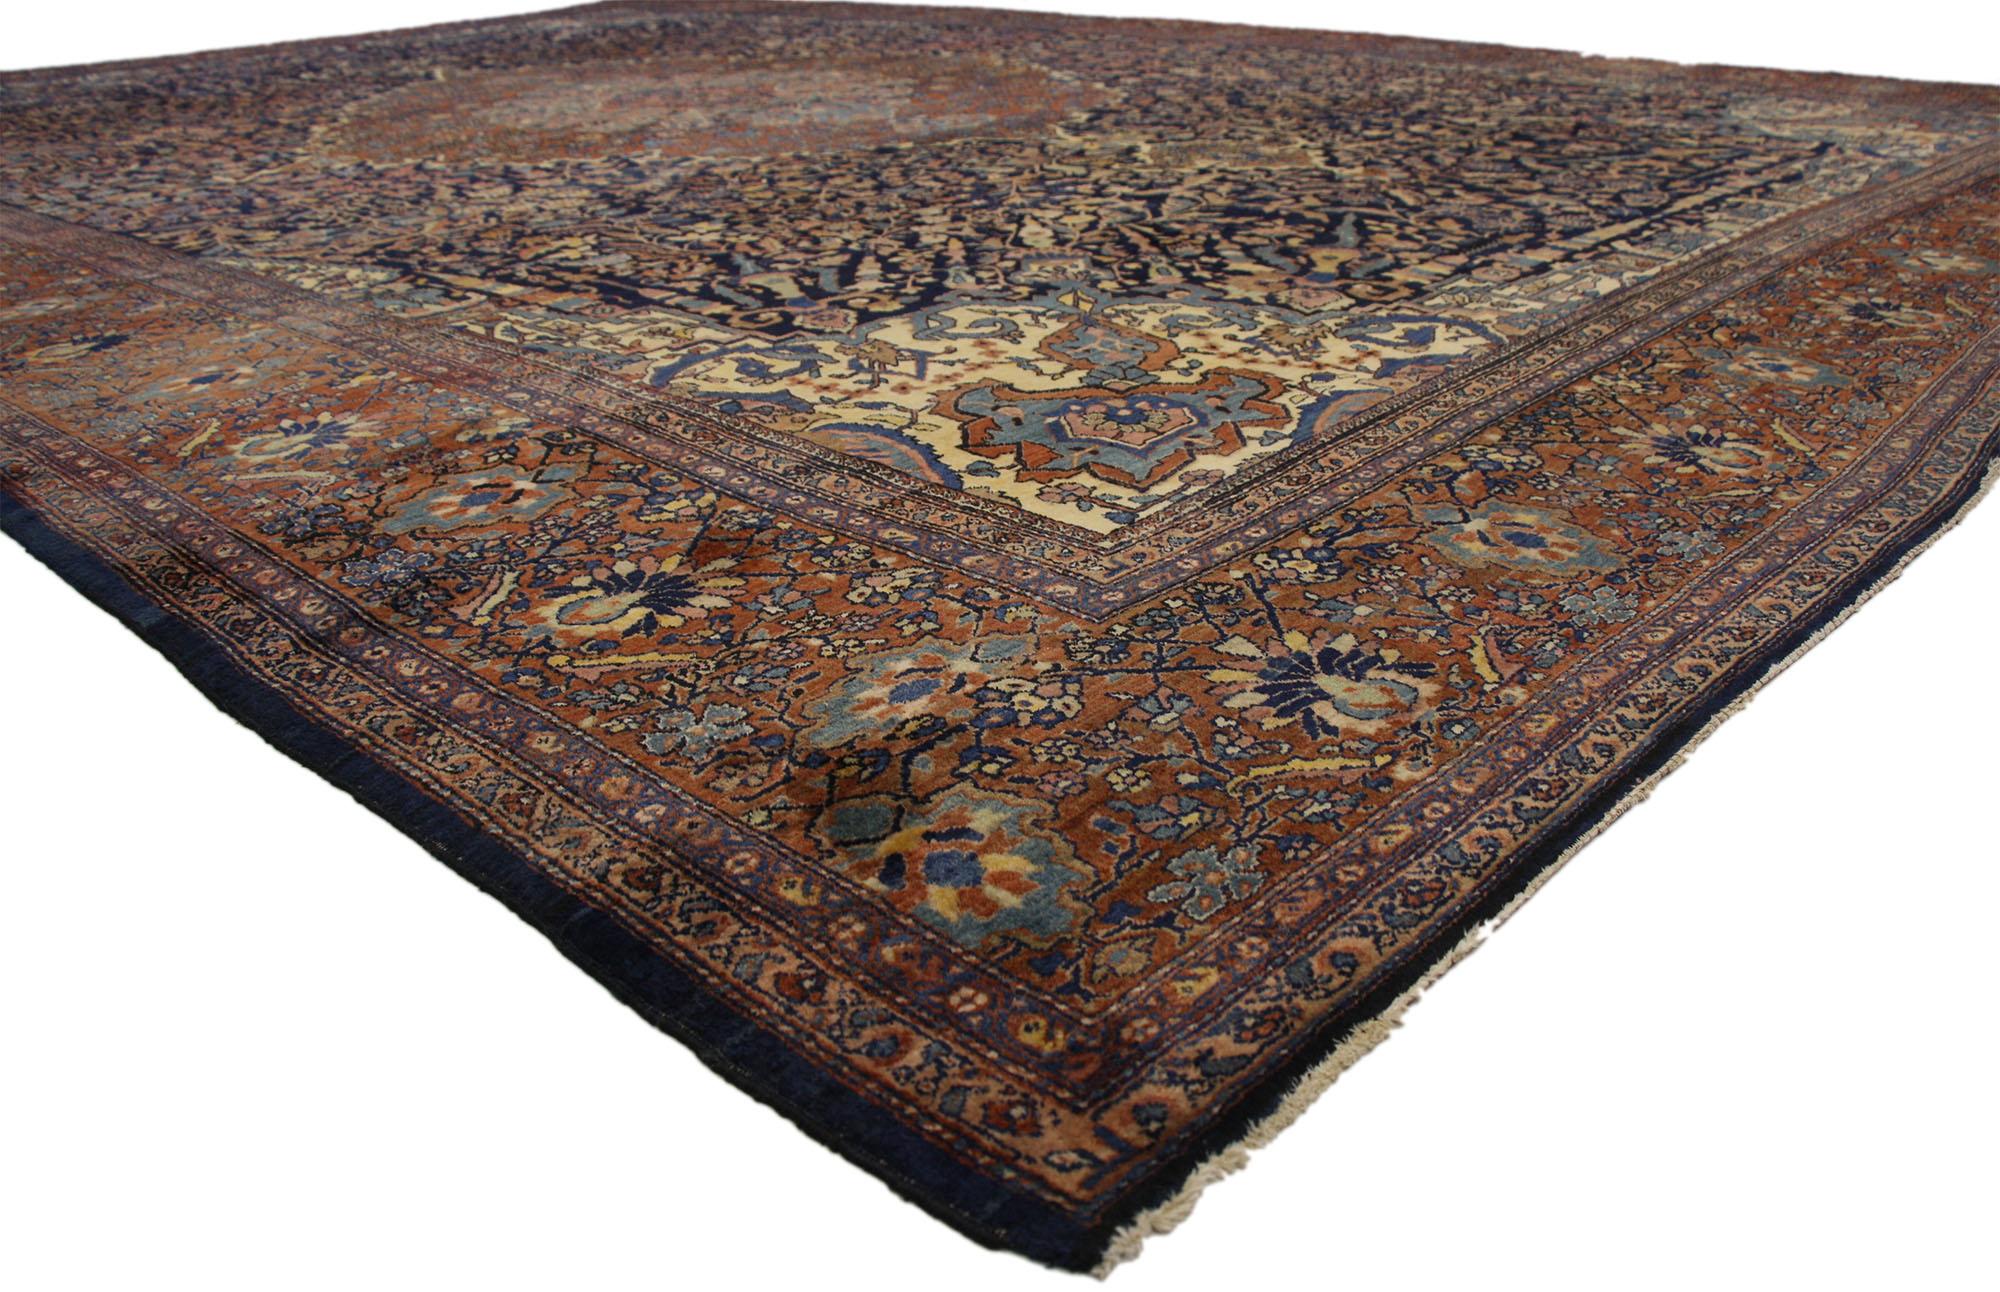 77179 antique Persian Sarouk Farahan rug, Persian palace size rug. Showcasing luxurious opulence and traditional style this hand knotted wool antique Persian Sarouk Farahan rug is a vision of Classic beauty. At the center, a large oval medallion